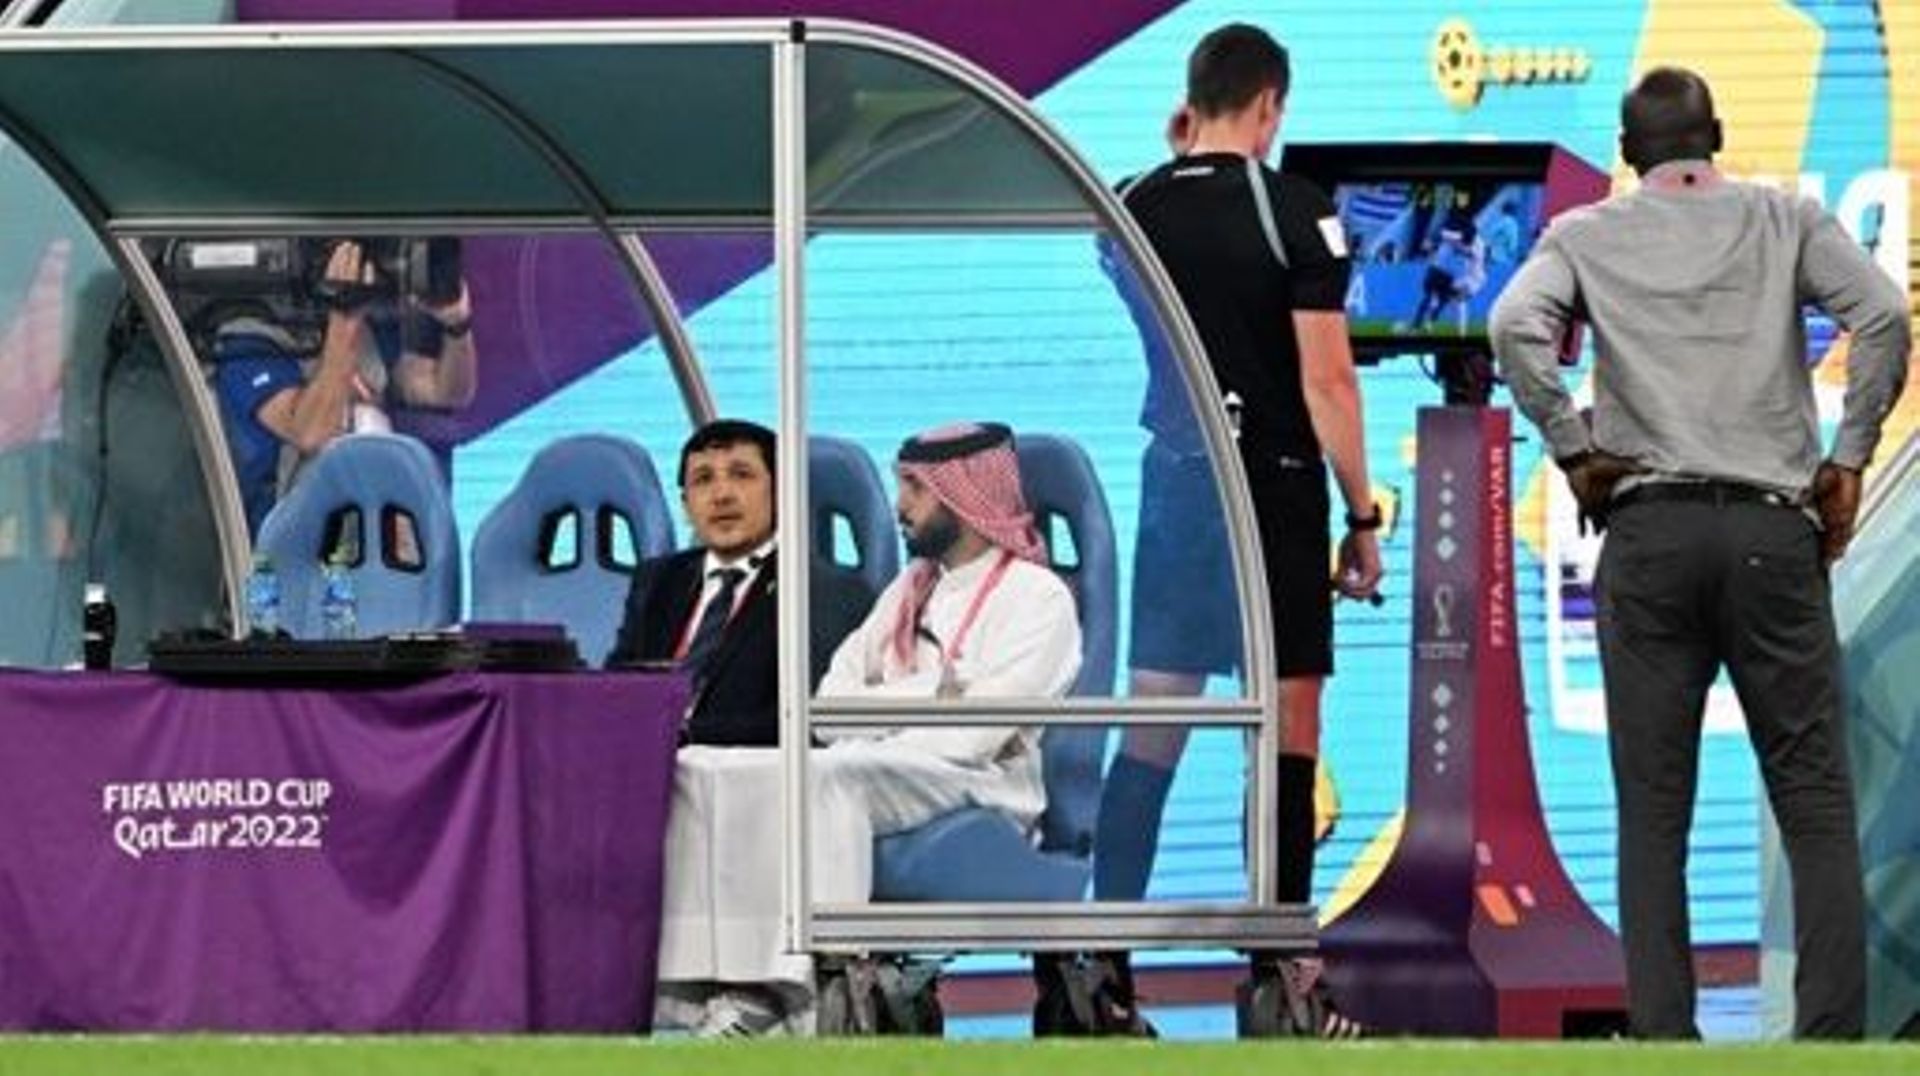 German referee Daniel Siebert checks the VAR for a possible penalty against Uruguay during the Qatar 2022 World Cup Group H football match between Ghana and Uruguay at the Al-Janoub Stadium in Al-Wakrah, south of Doha on December 2, 2022.  Raul ARBOLEDA /